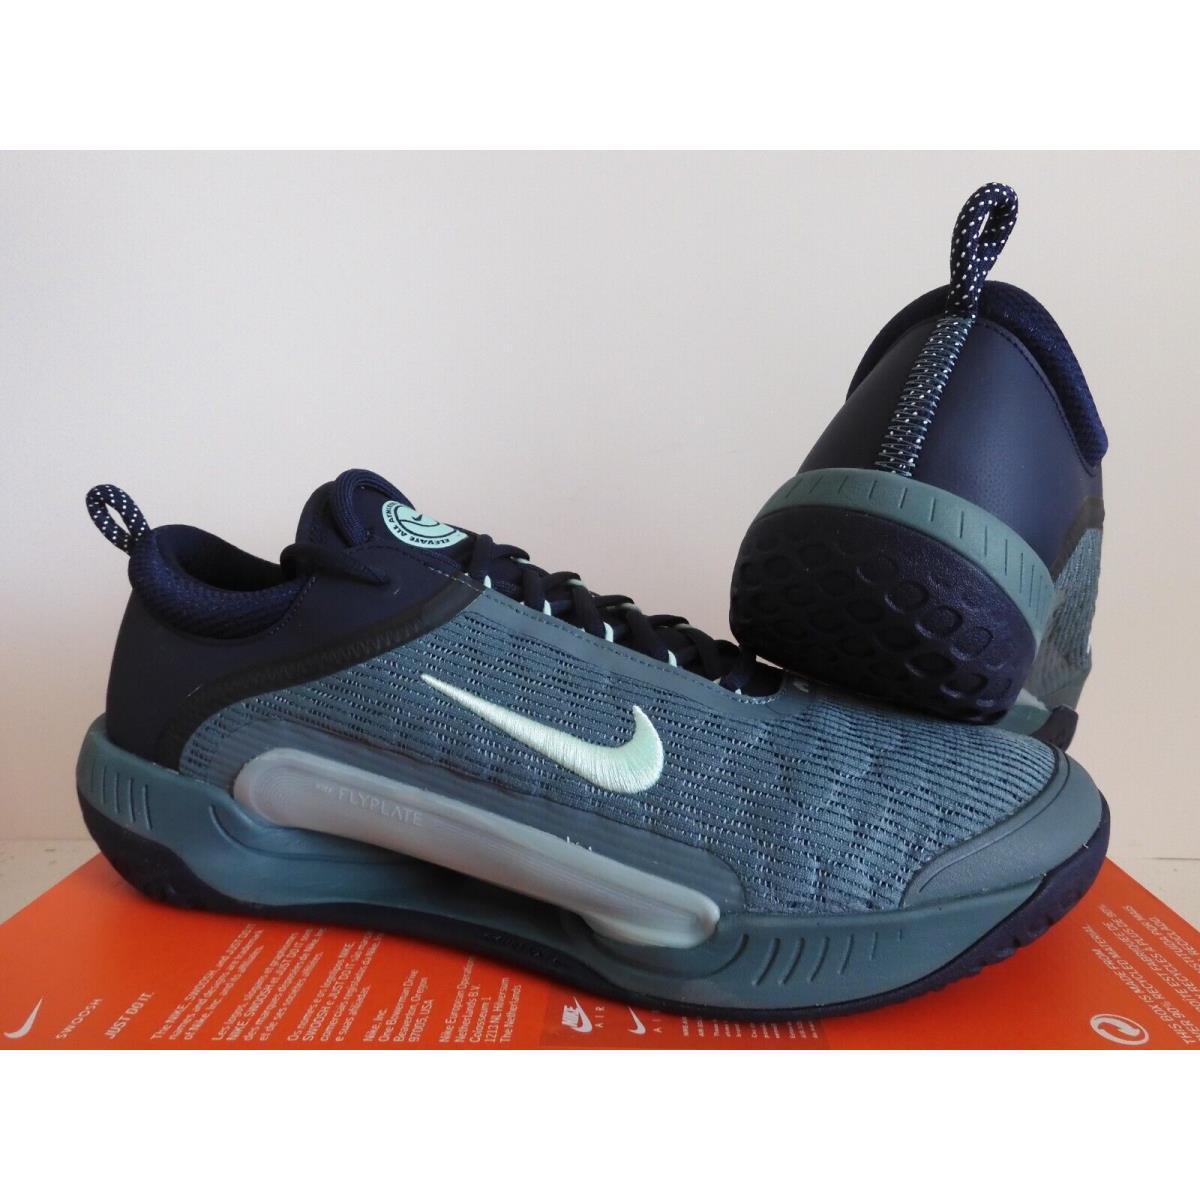 Nike shoes Zoom Court - Blue 0